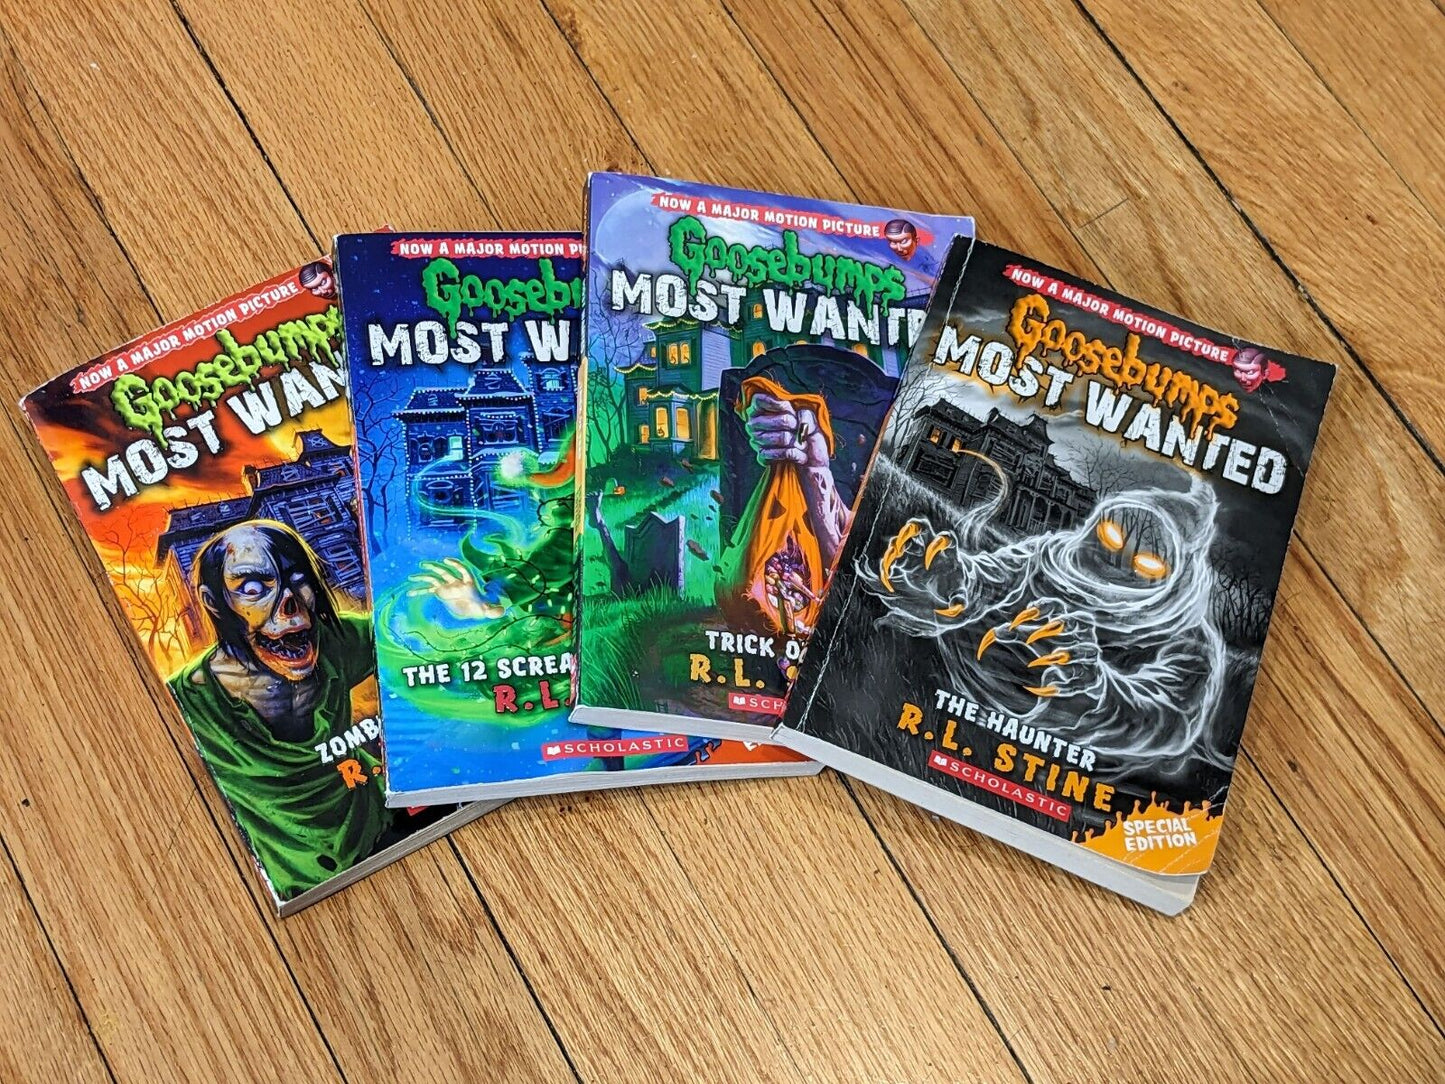 GOOSEBUMPS MOST WANTED 4 Pack - RL Stine Set SPECIAL Editions Books 1-4 - Asylum Books